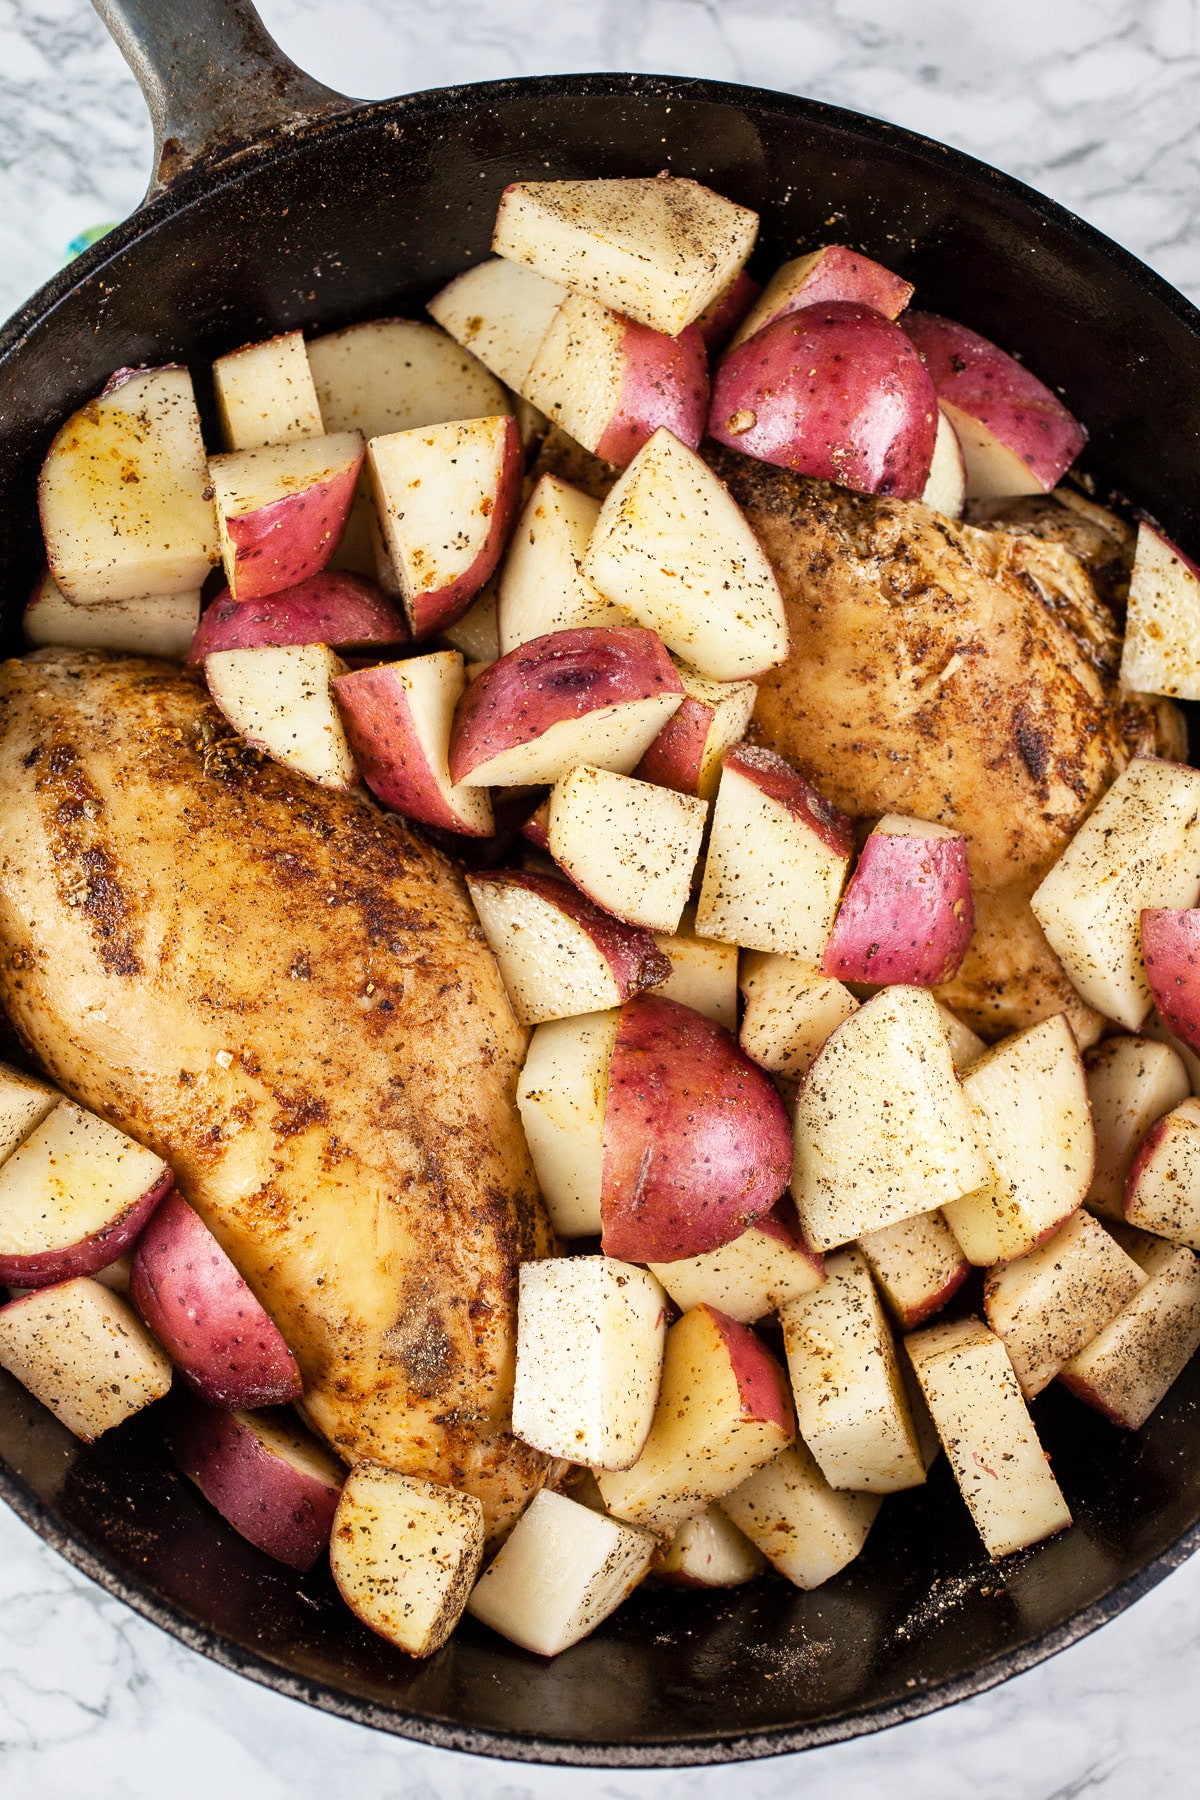 Uncooked chicken breasts and red potatoes in Dutch oven.